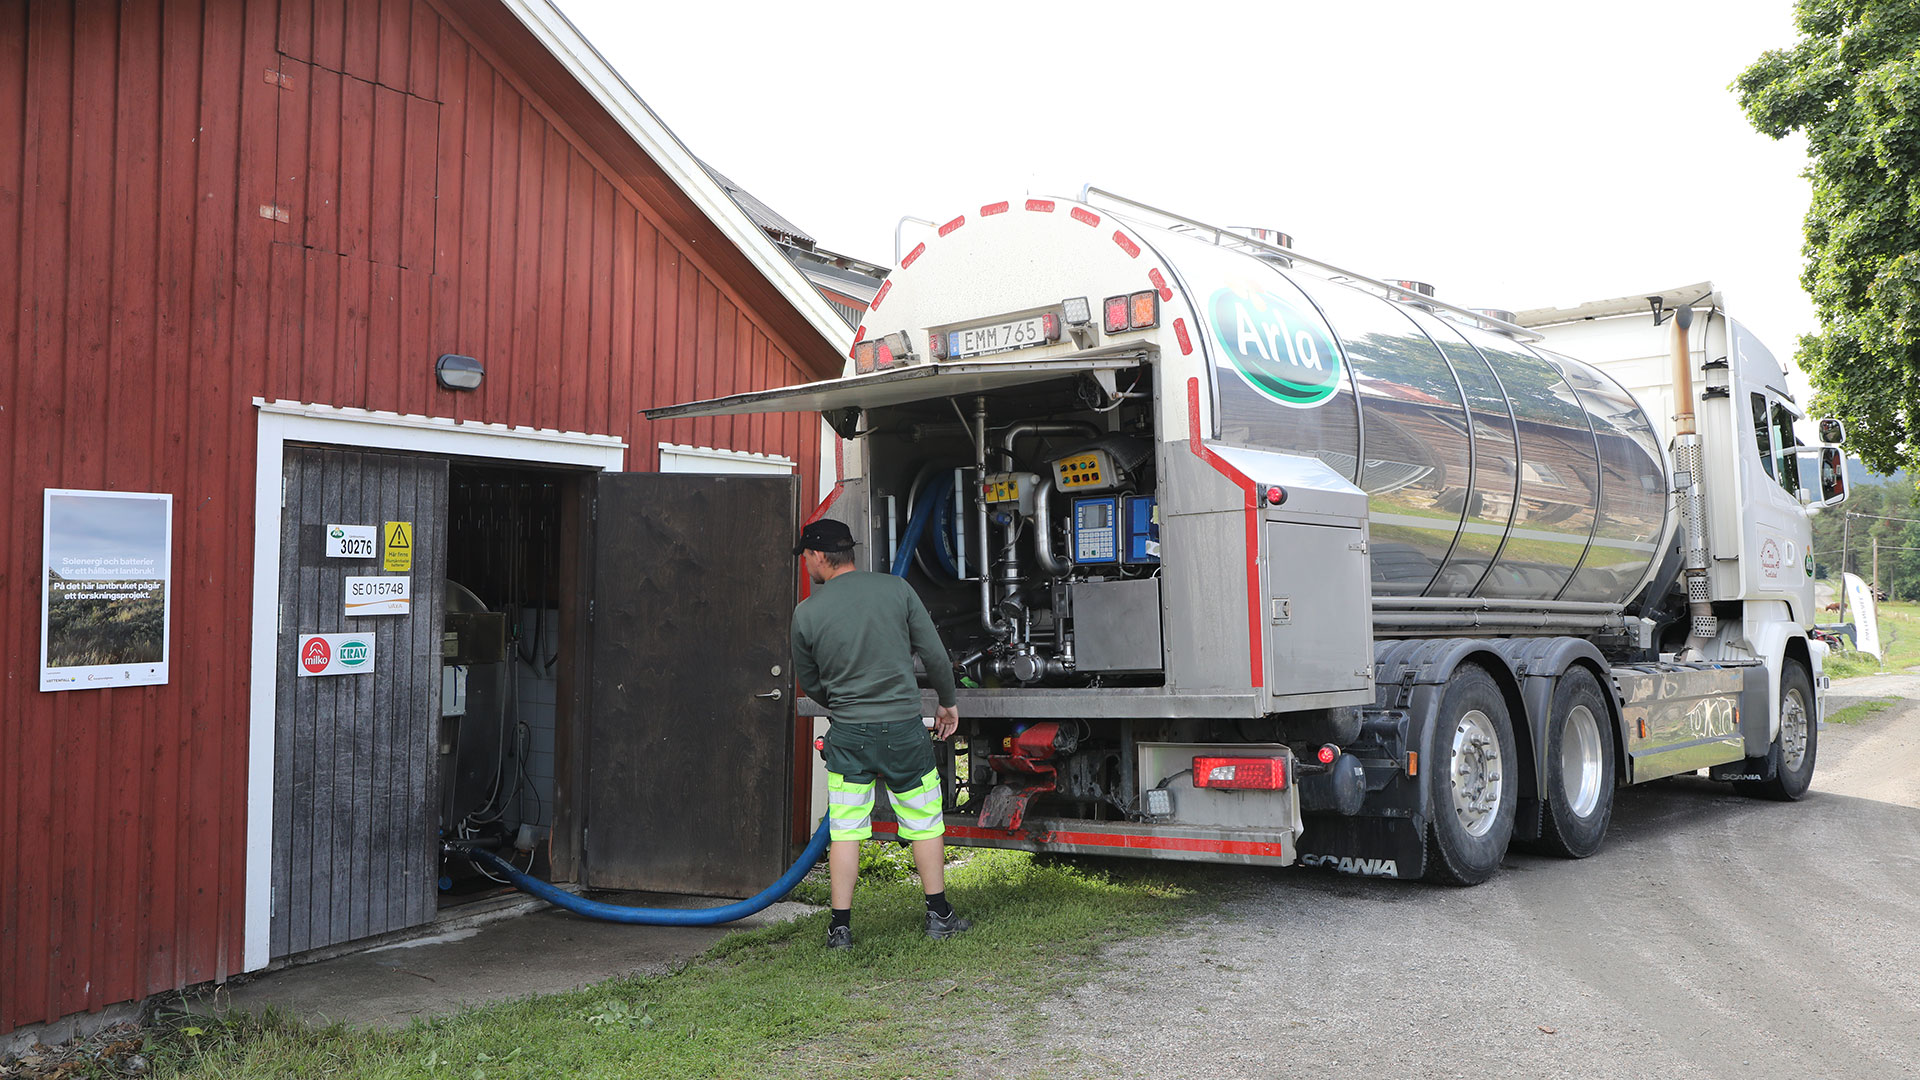 The dairy tank truck collects the organic milk from the farm